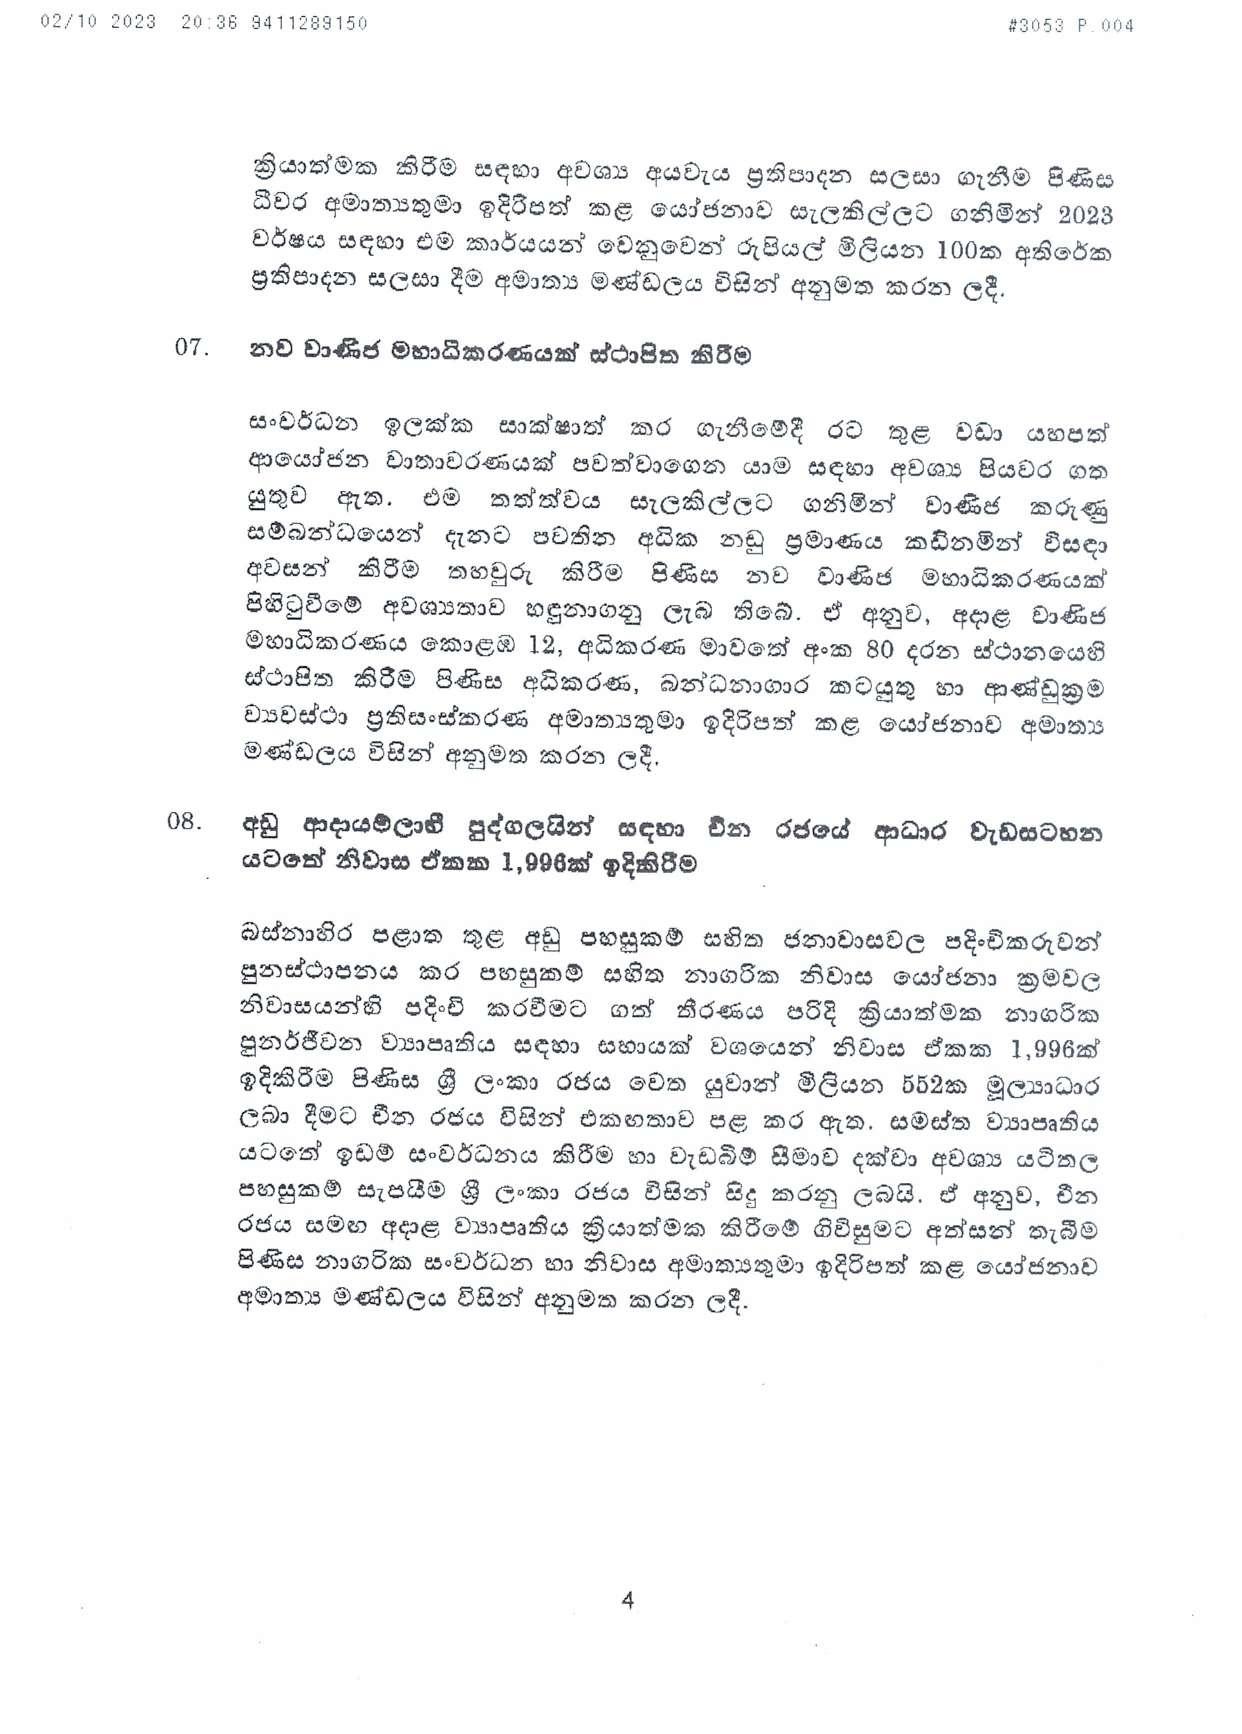 Cabinet Decision on 02.10.2023 page 004